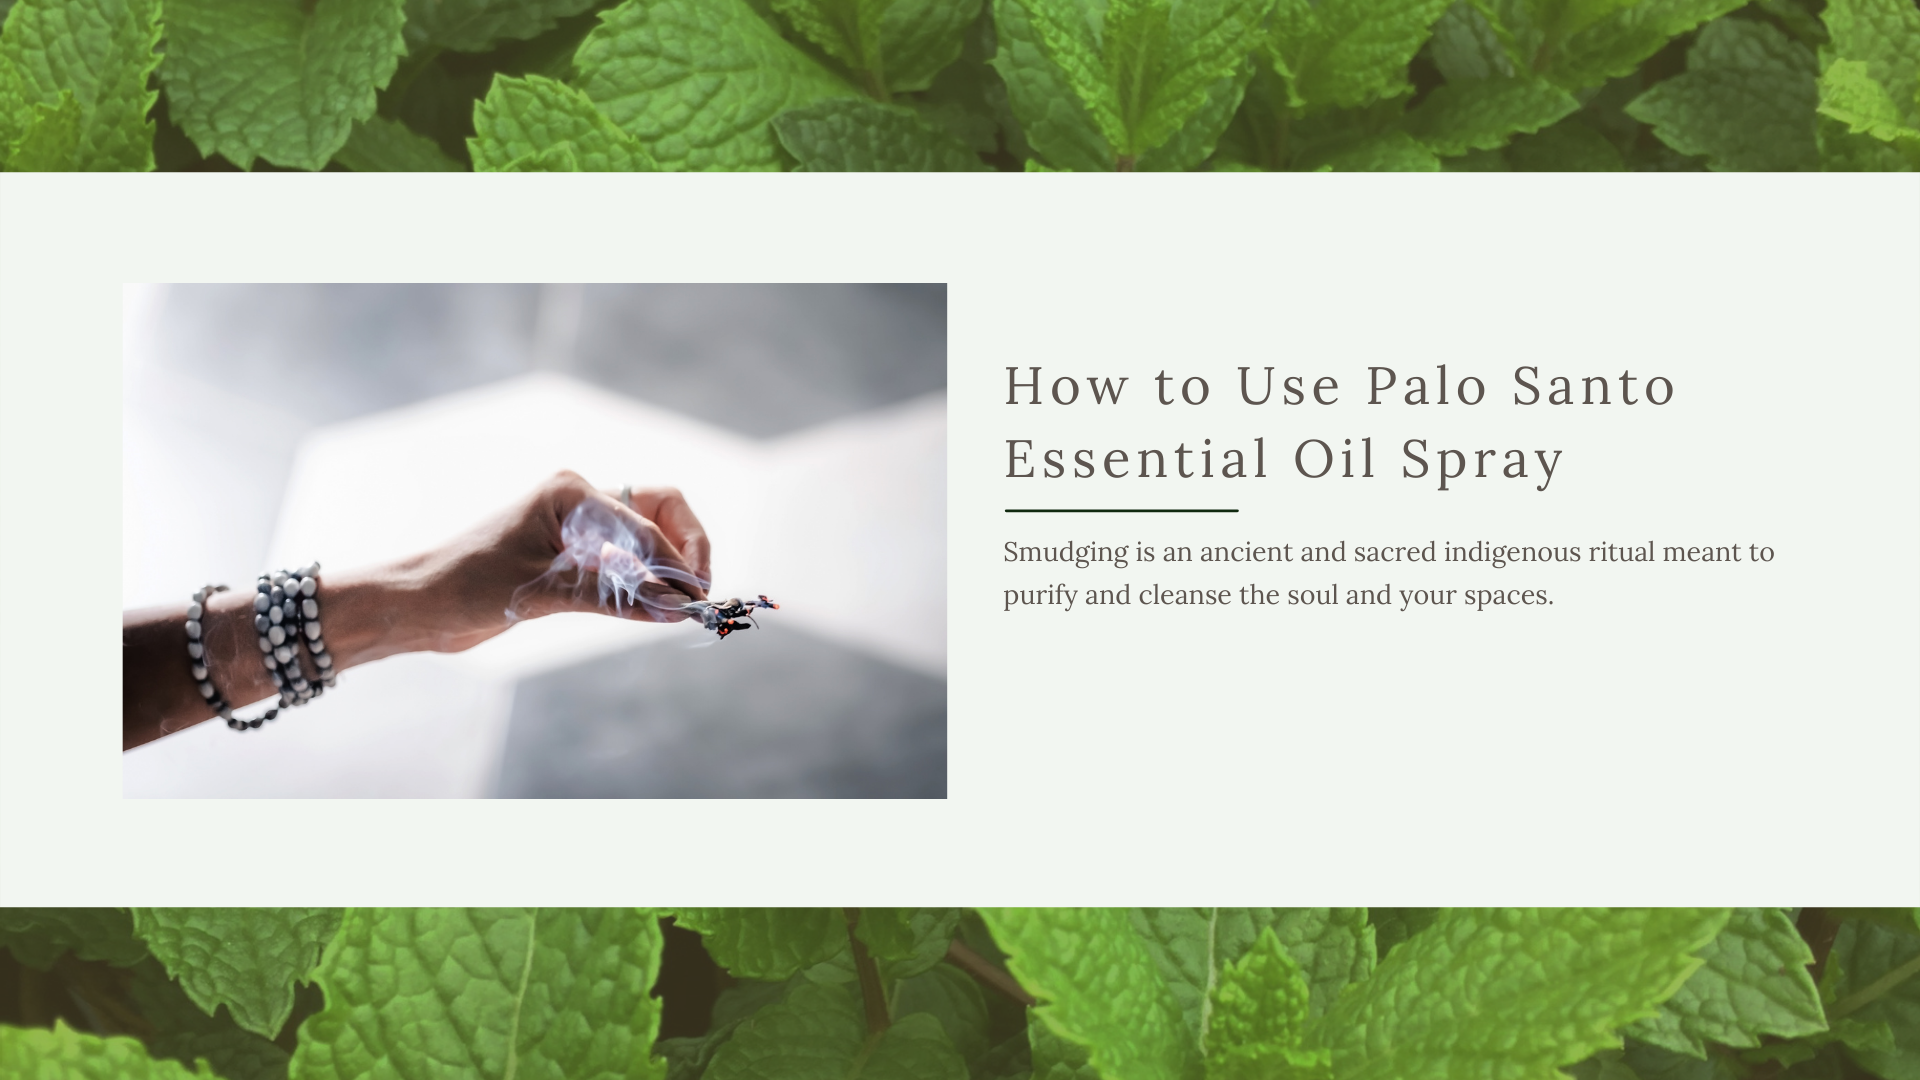 Smudging is one of the uses for palo santo essential oil